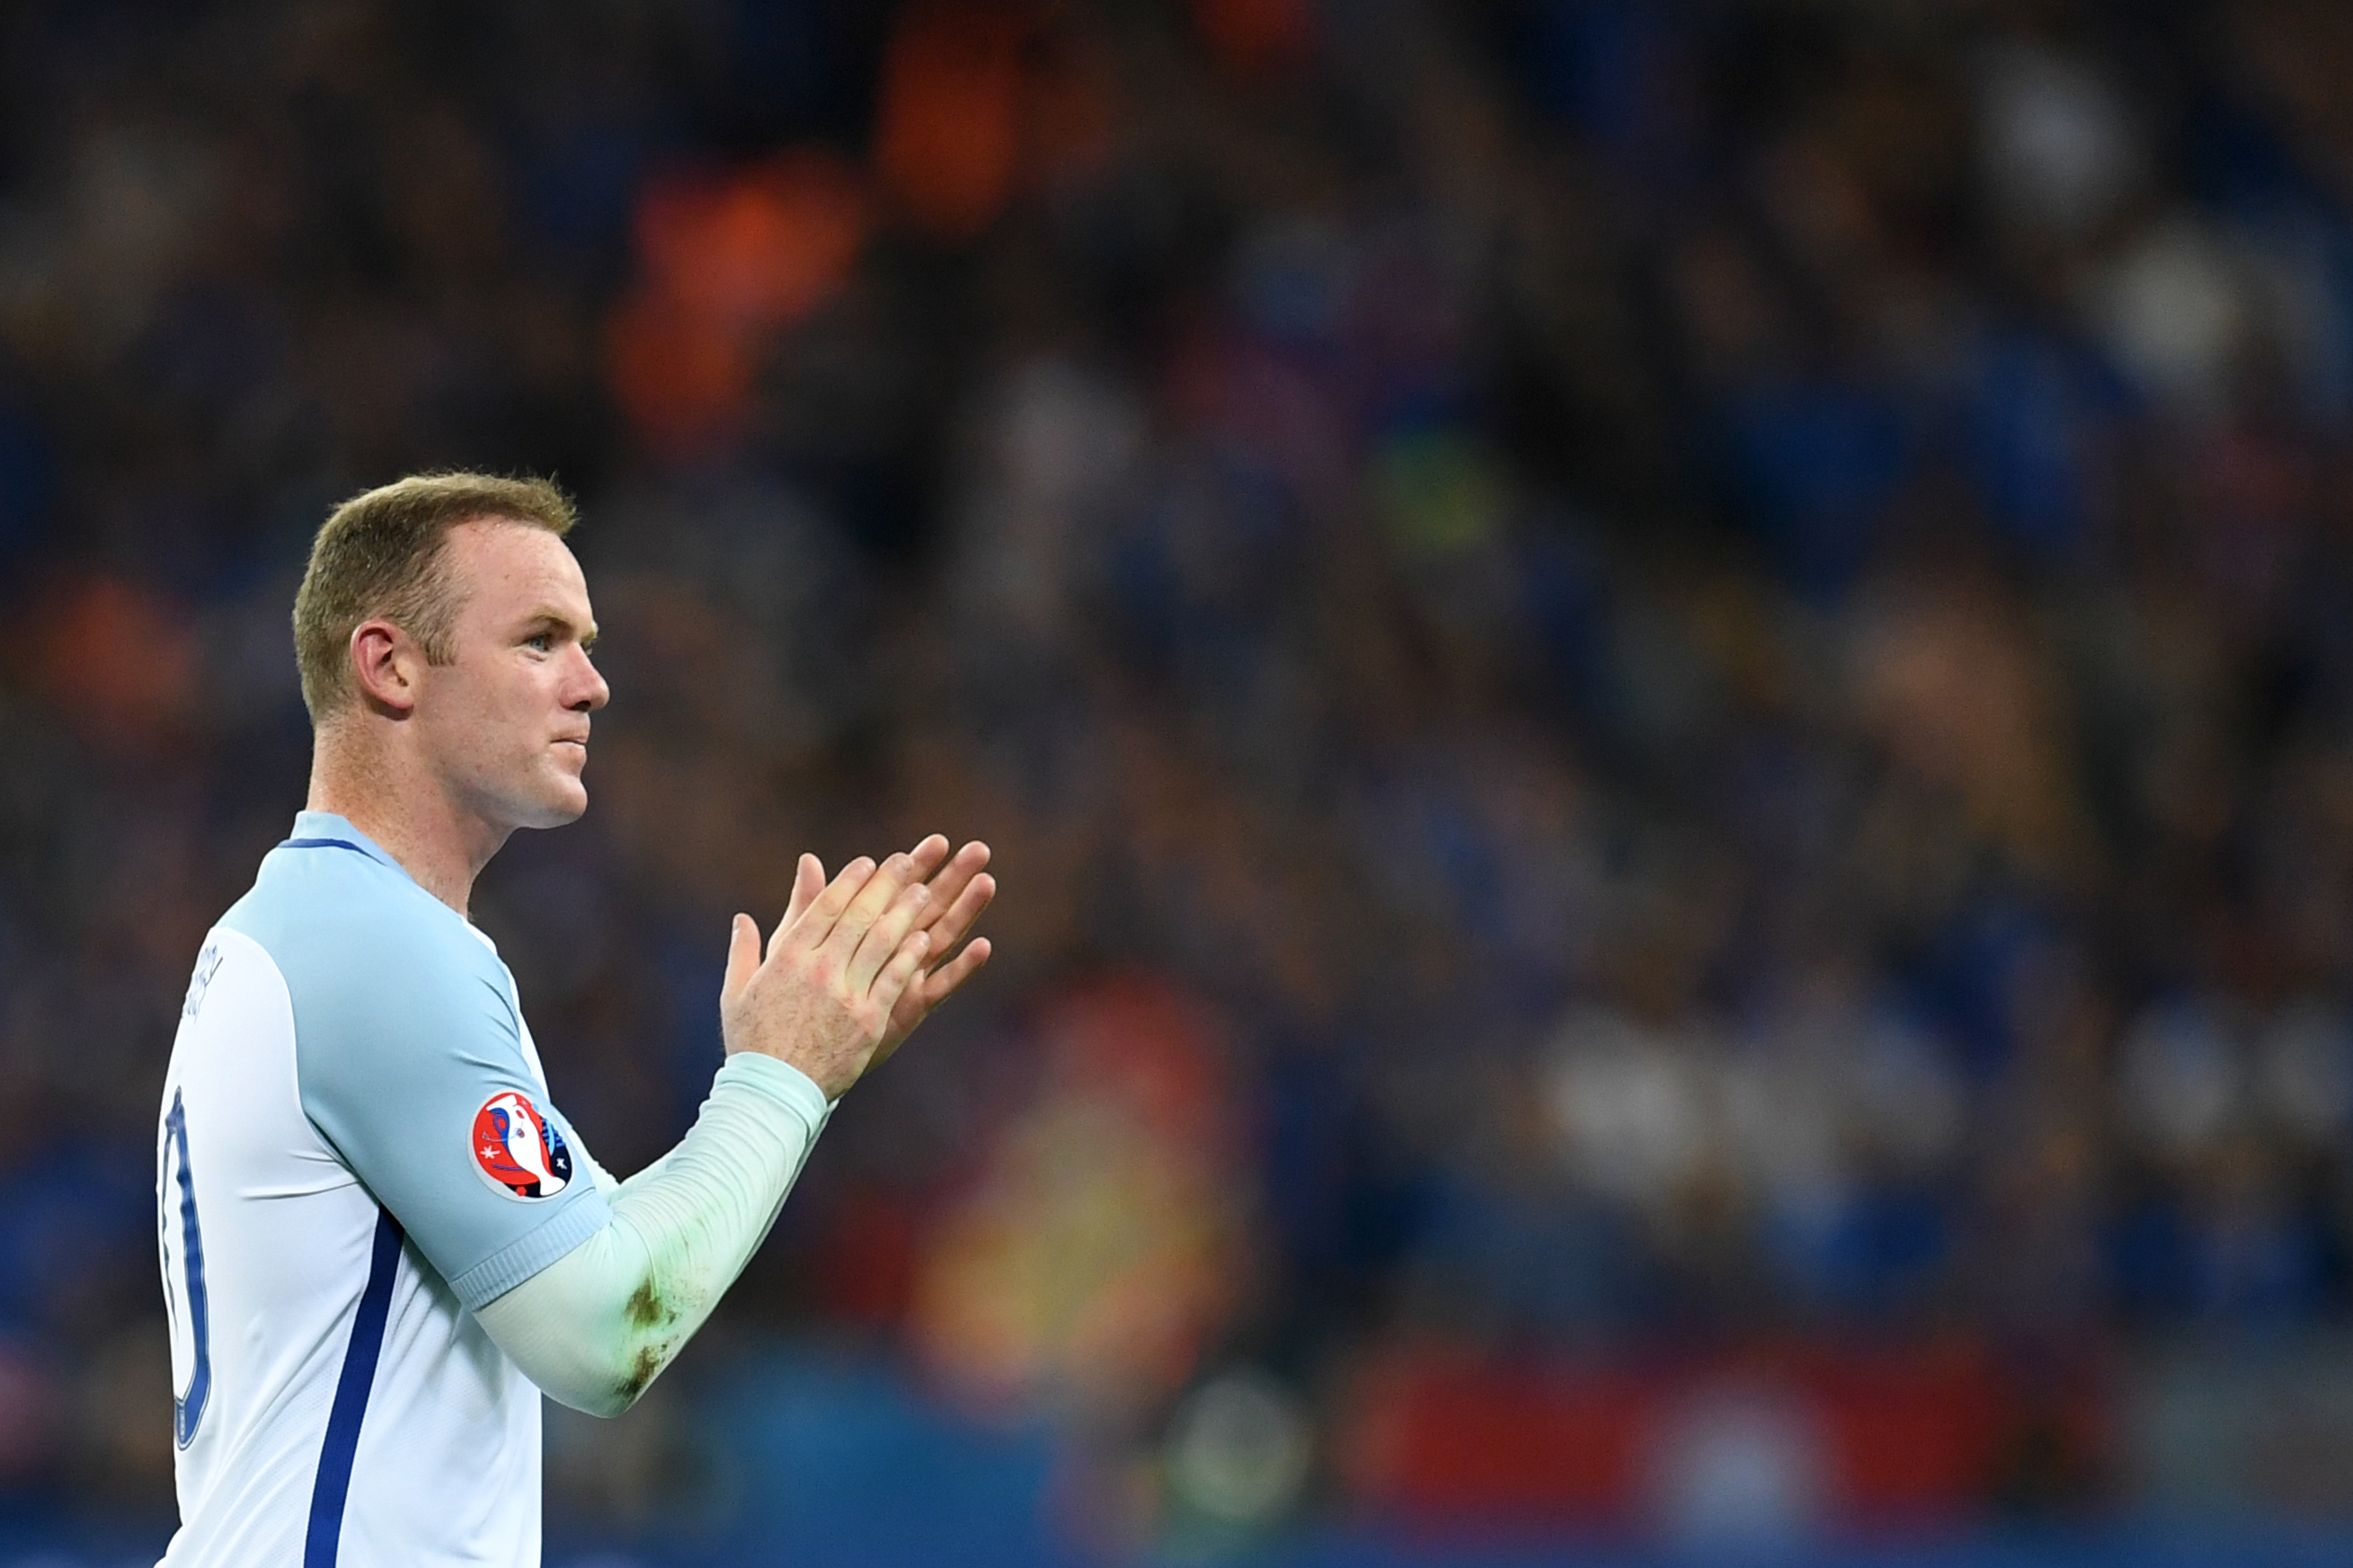 England's forward Wayne Rooney acknowledges the fans after England lost 2-1 to Iceland in the Euro 2016 round of 16 football match between England and Iceland at the Allianz Riviera stadium in Nice on June 27, 2016.   / AFP / PAUL ELLIS        (Photo credit should read PAUL ELLIS/AFP/Getty Images)